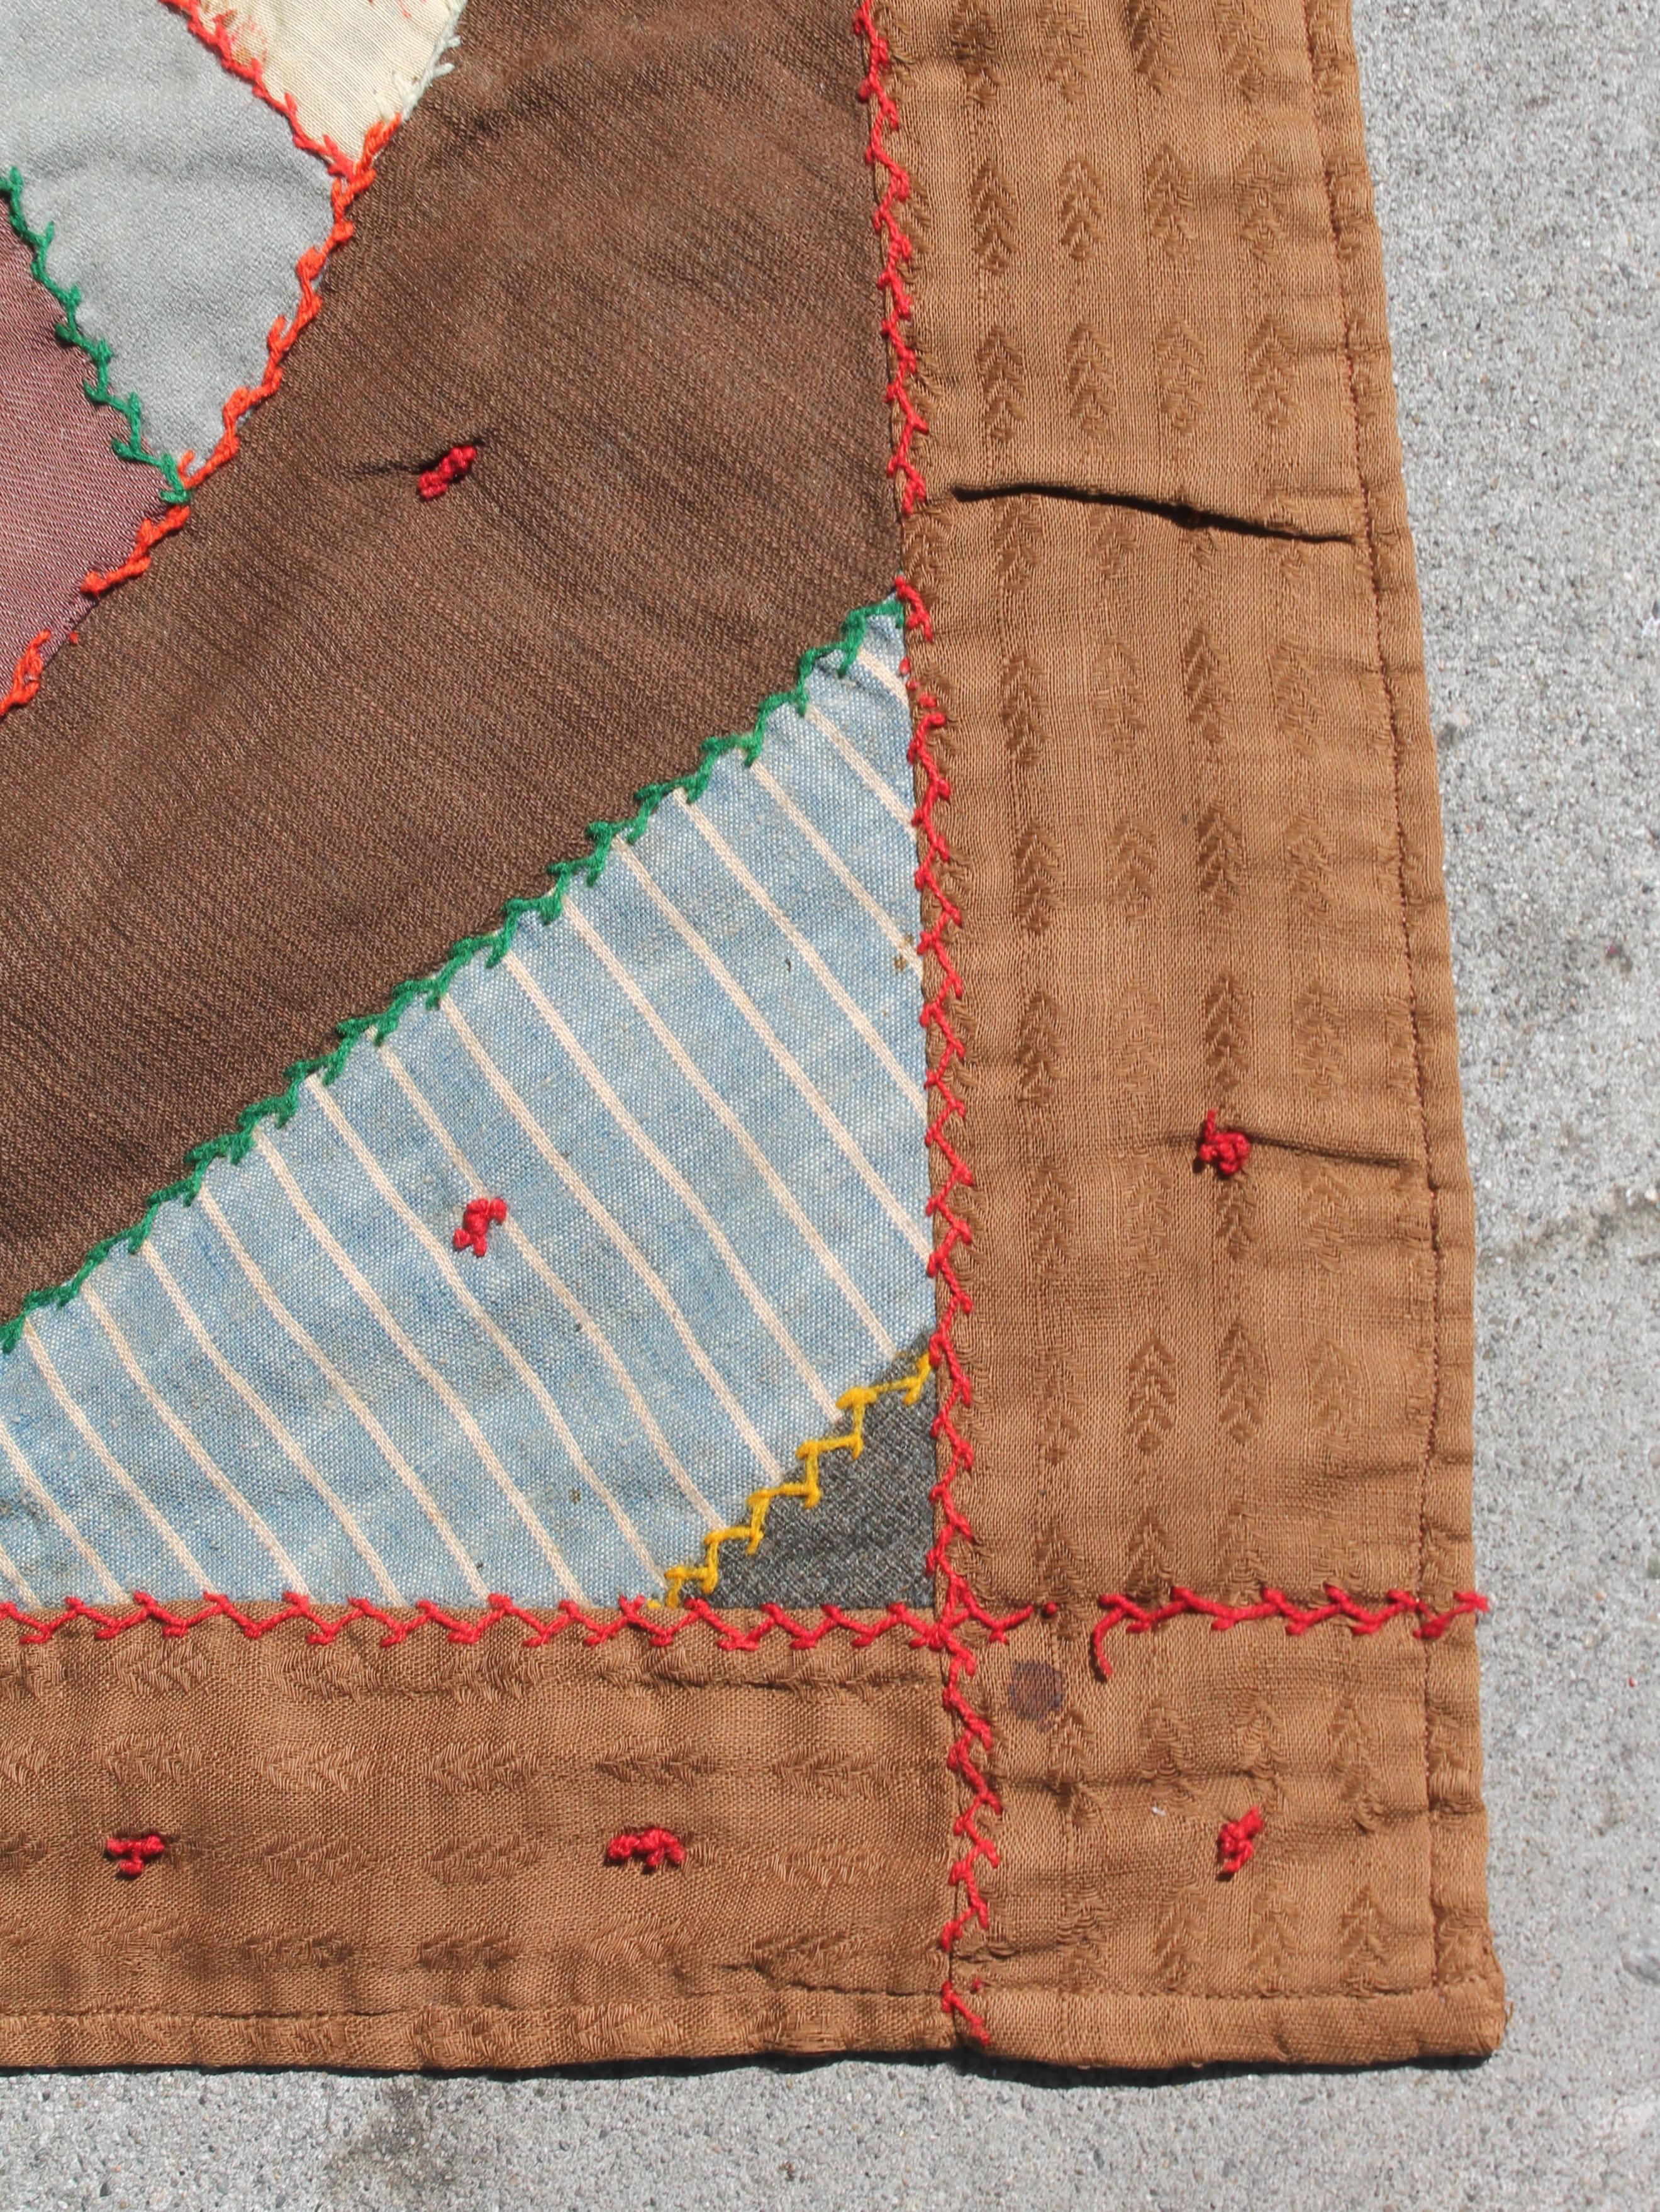 Hand-Crafted Antique Quilt, Contained 19th Century Crazy Quilt from Pennsylvania